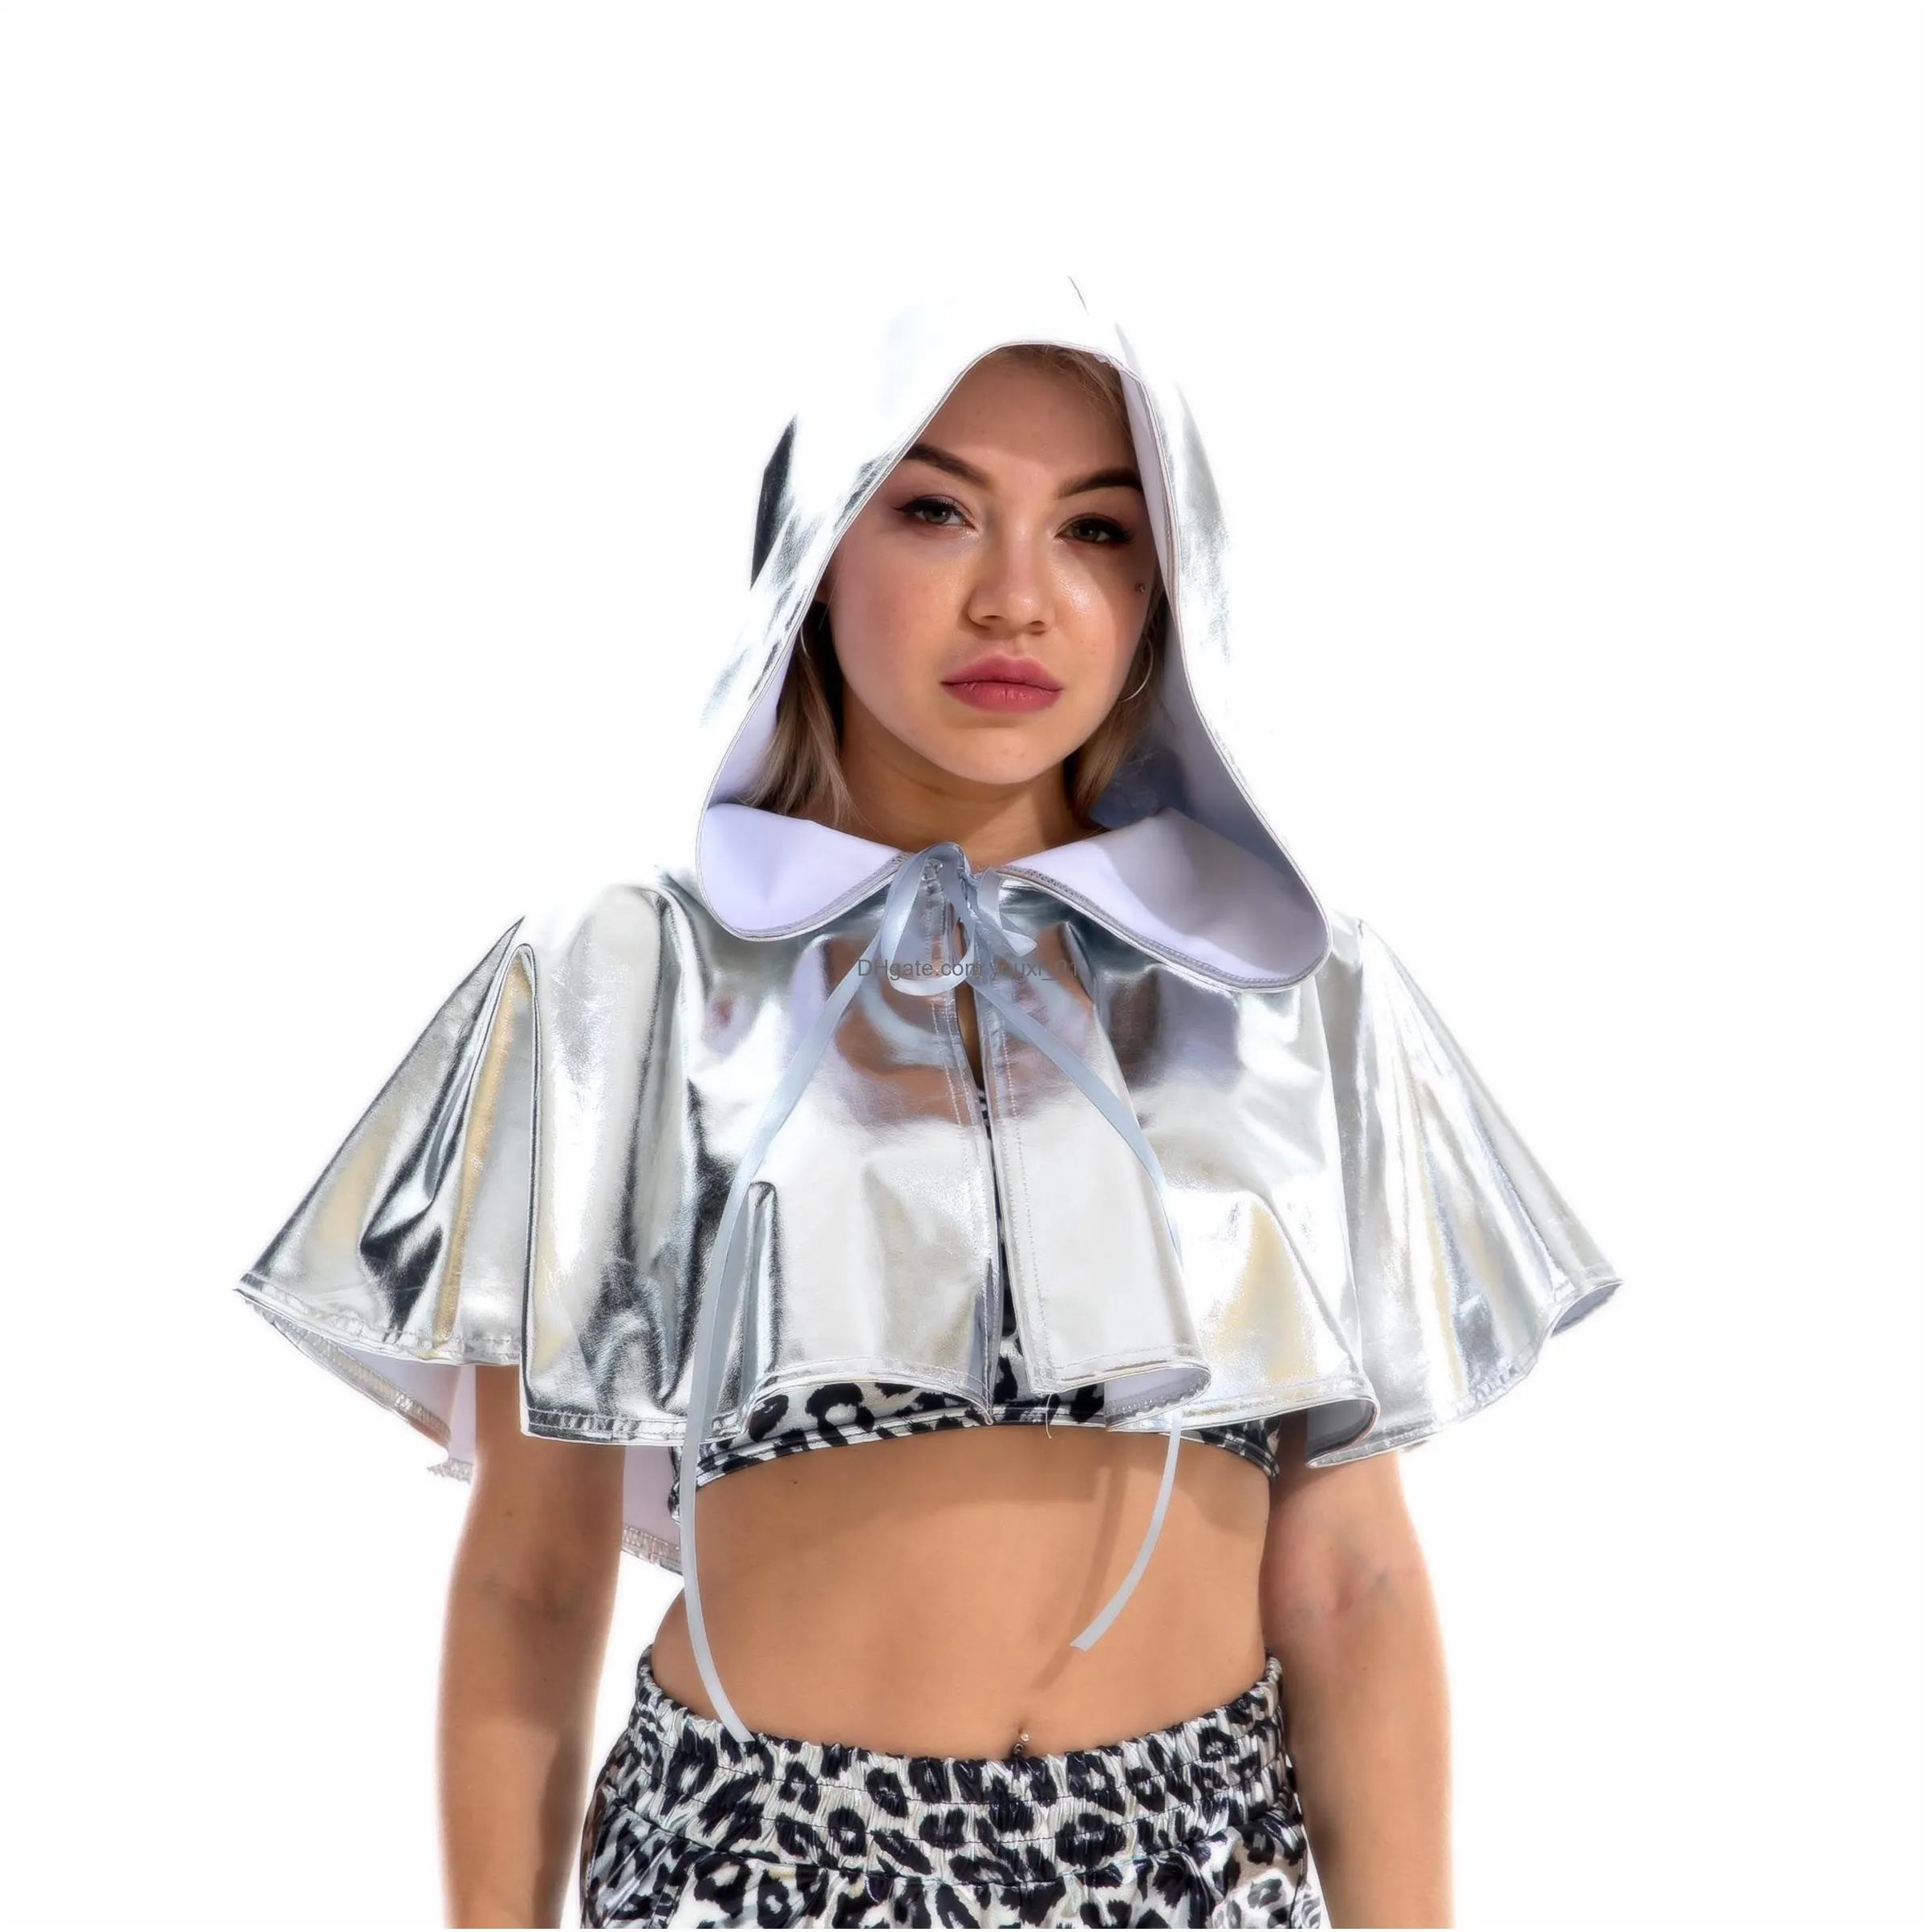 Stage Wear Candy Color Wetlook Shiny Pvc Halloween Cospaly Cape Pu Leather Cloak Hooded Costume Mask Hat Capes Night Clubwear Drop De Dh6I3